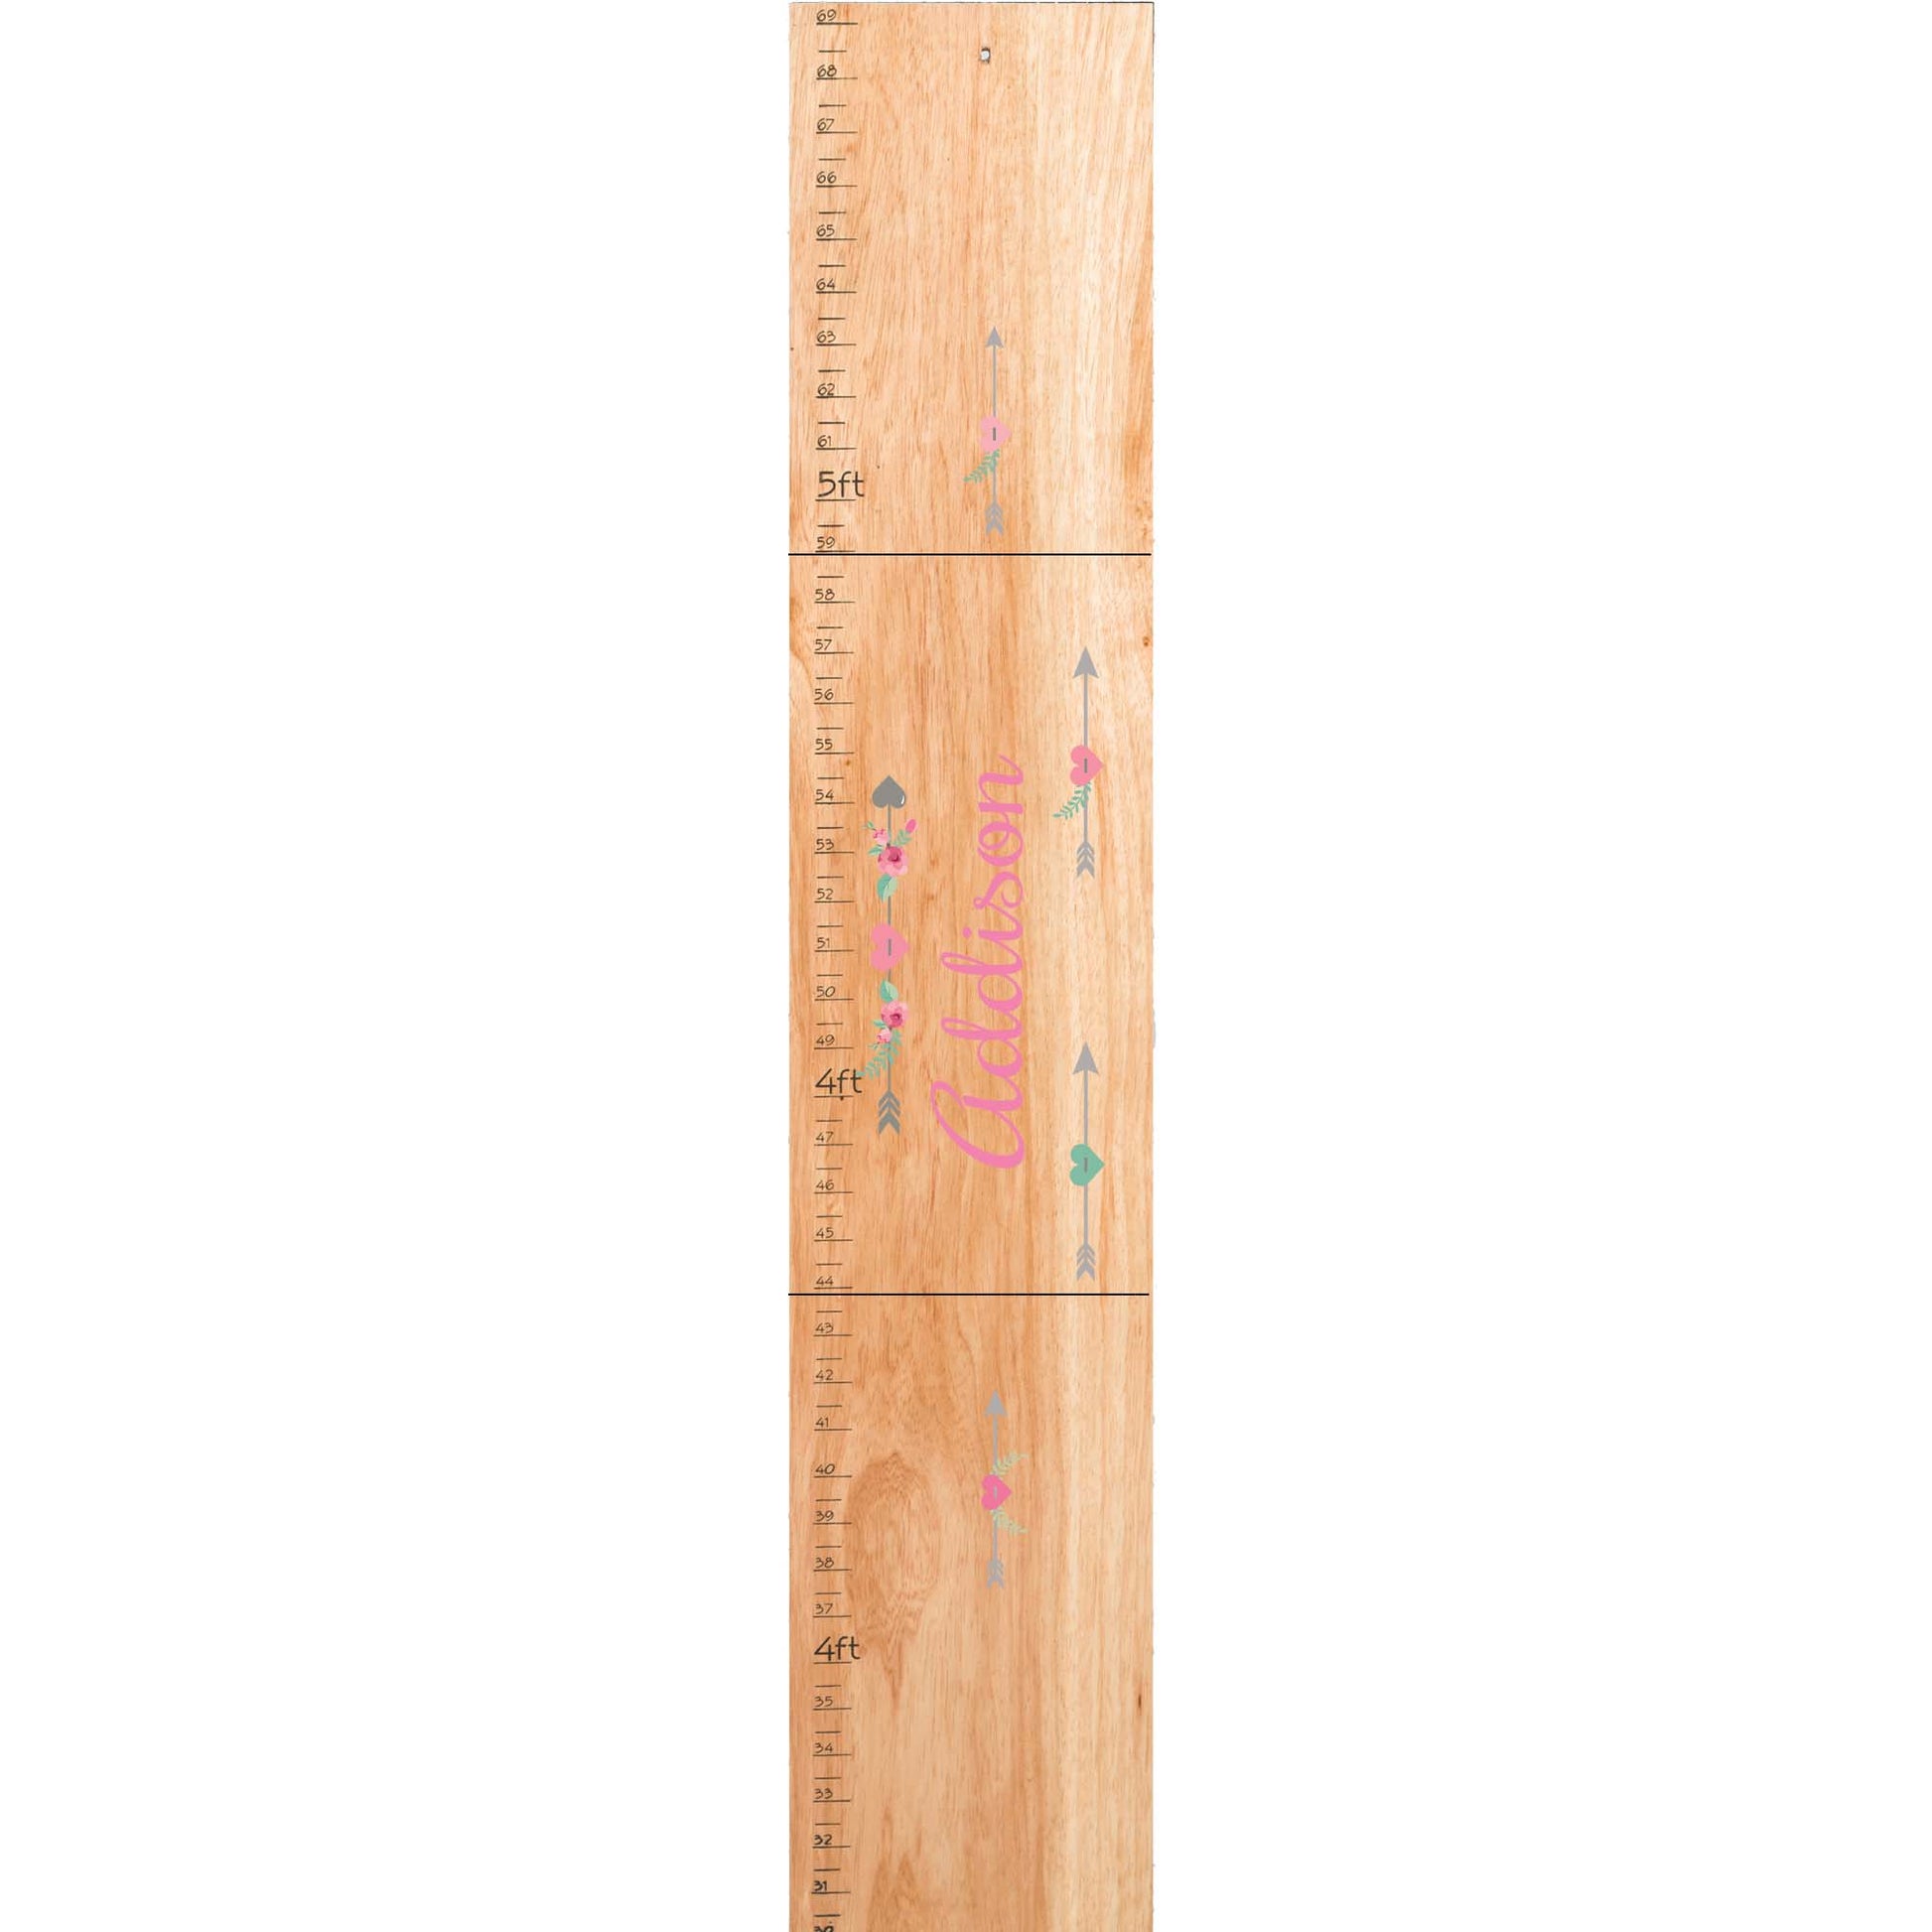 Personalized Natural Growth Chart With Tribal Arrow Girls Design